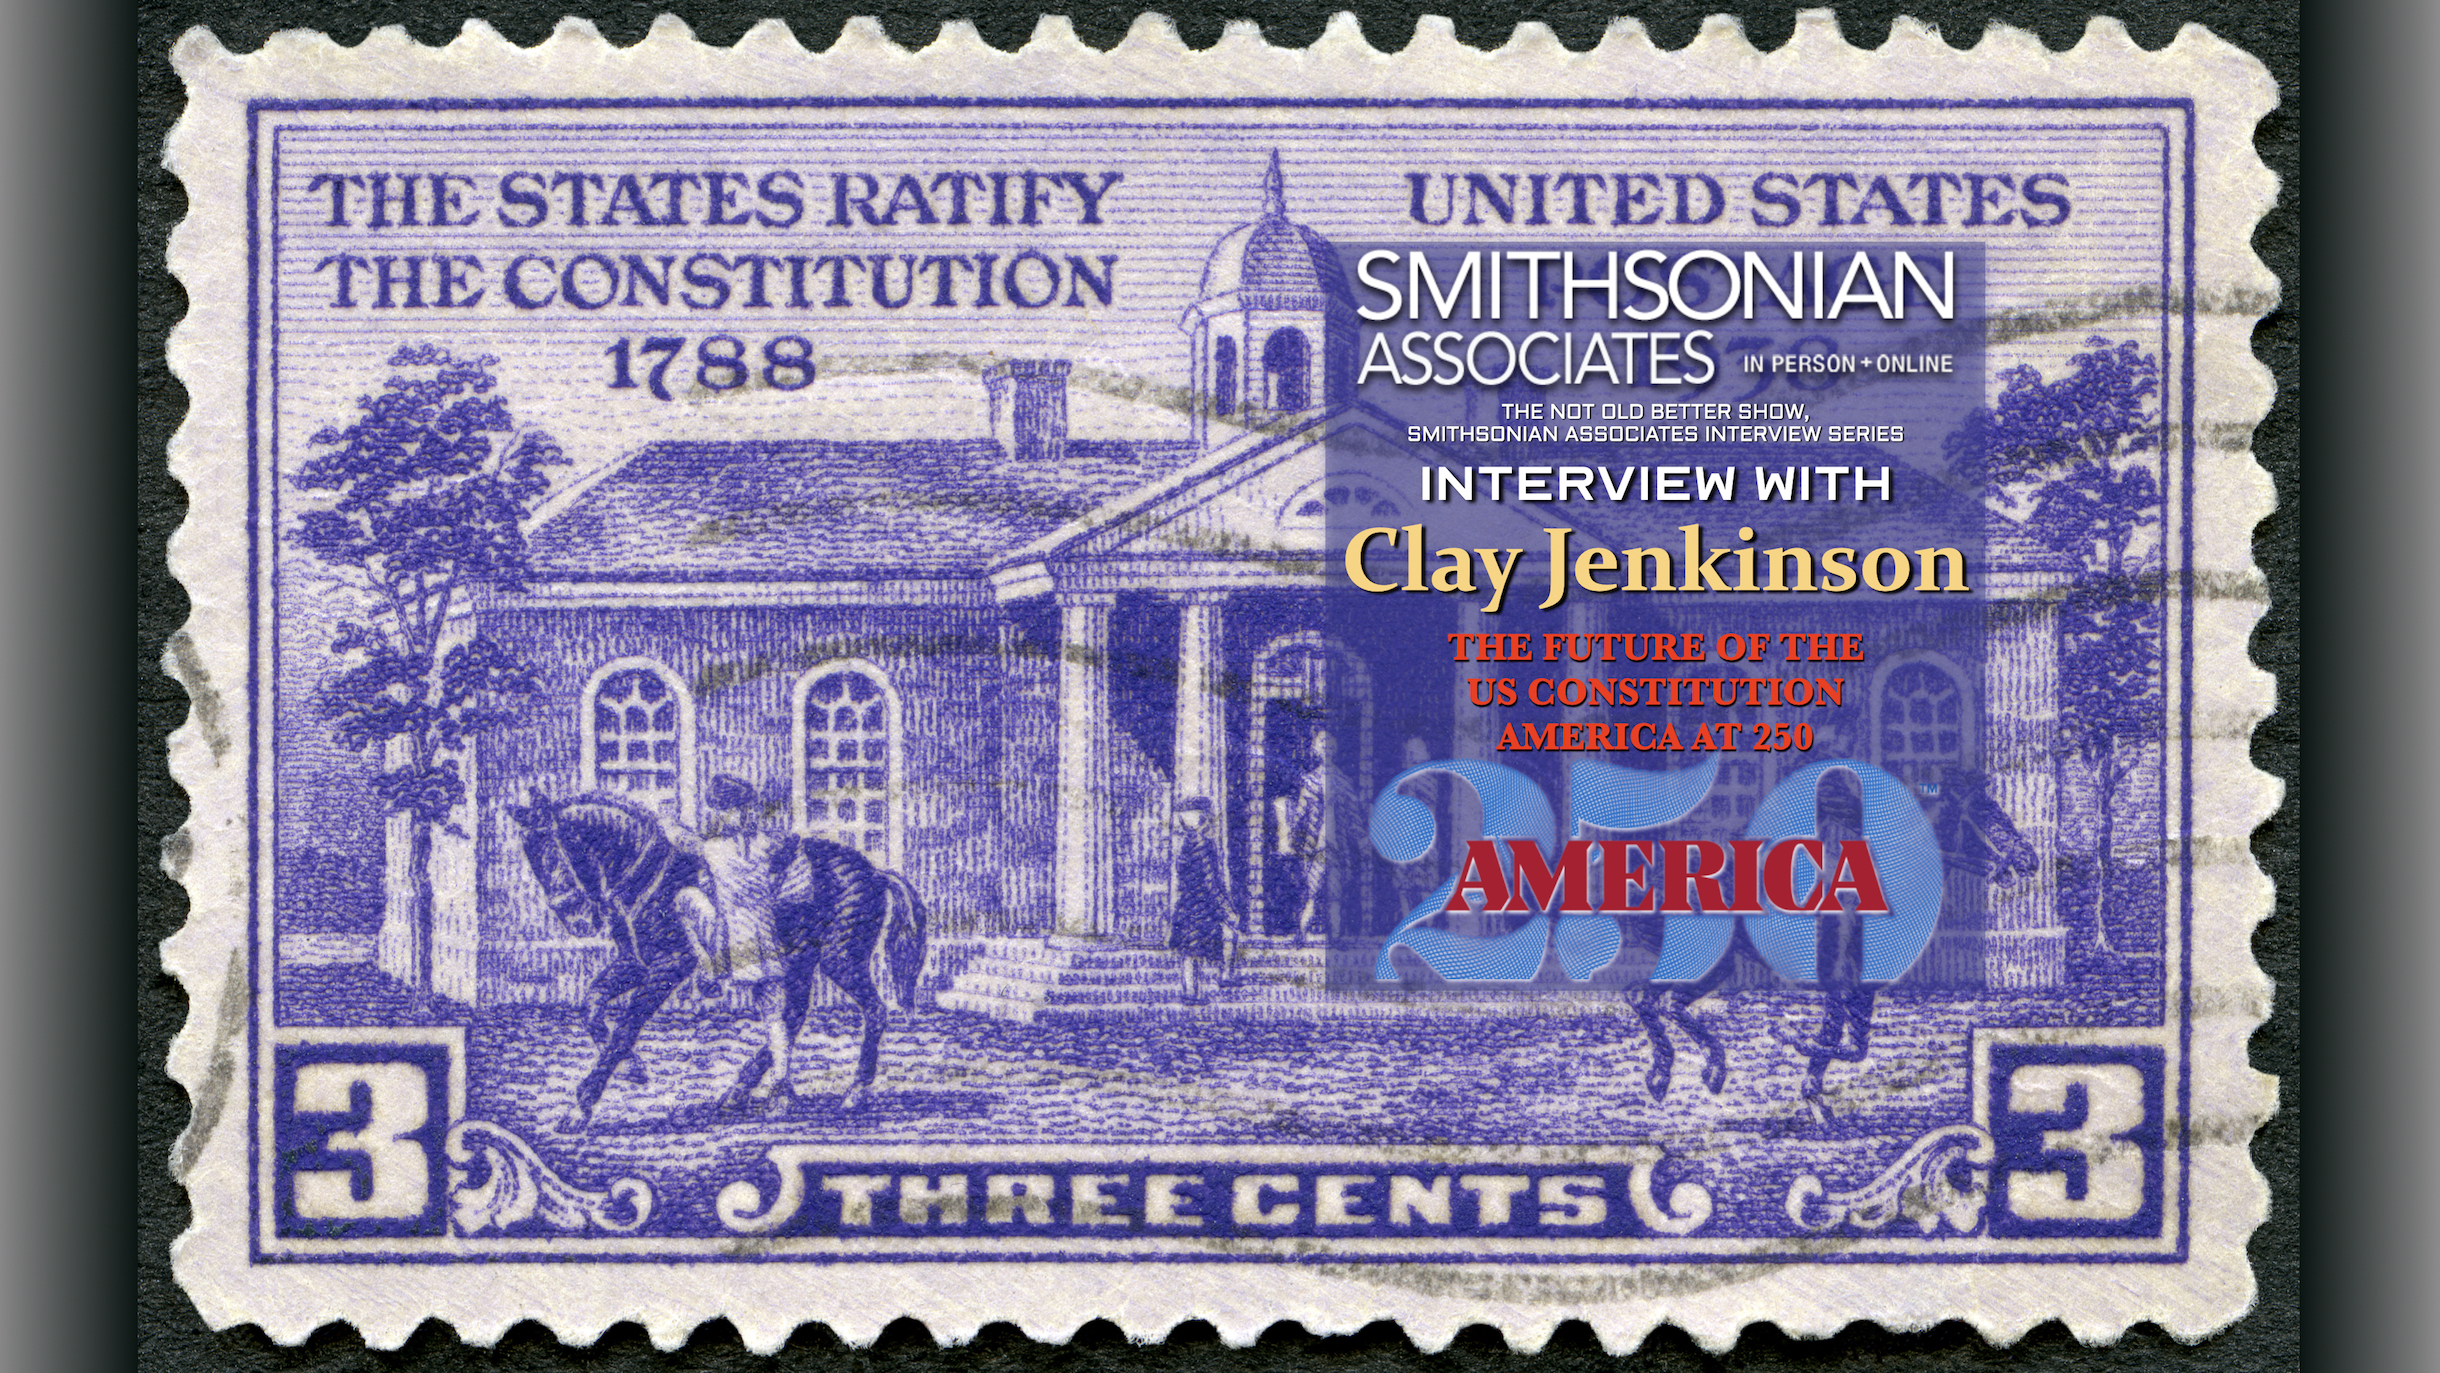 The Future of the US Constitution – Clay Jenkinson